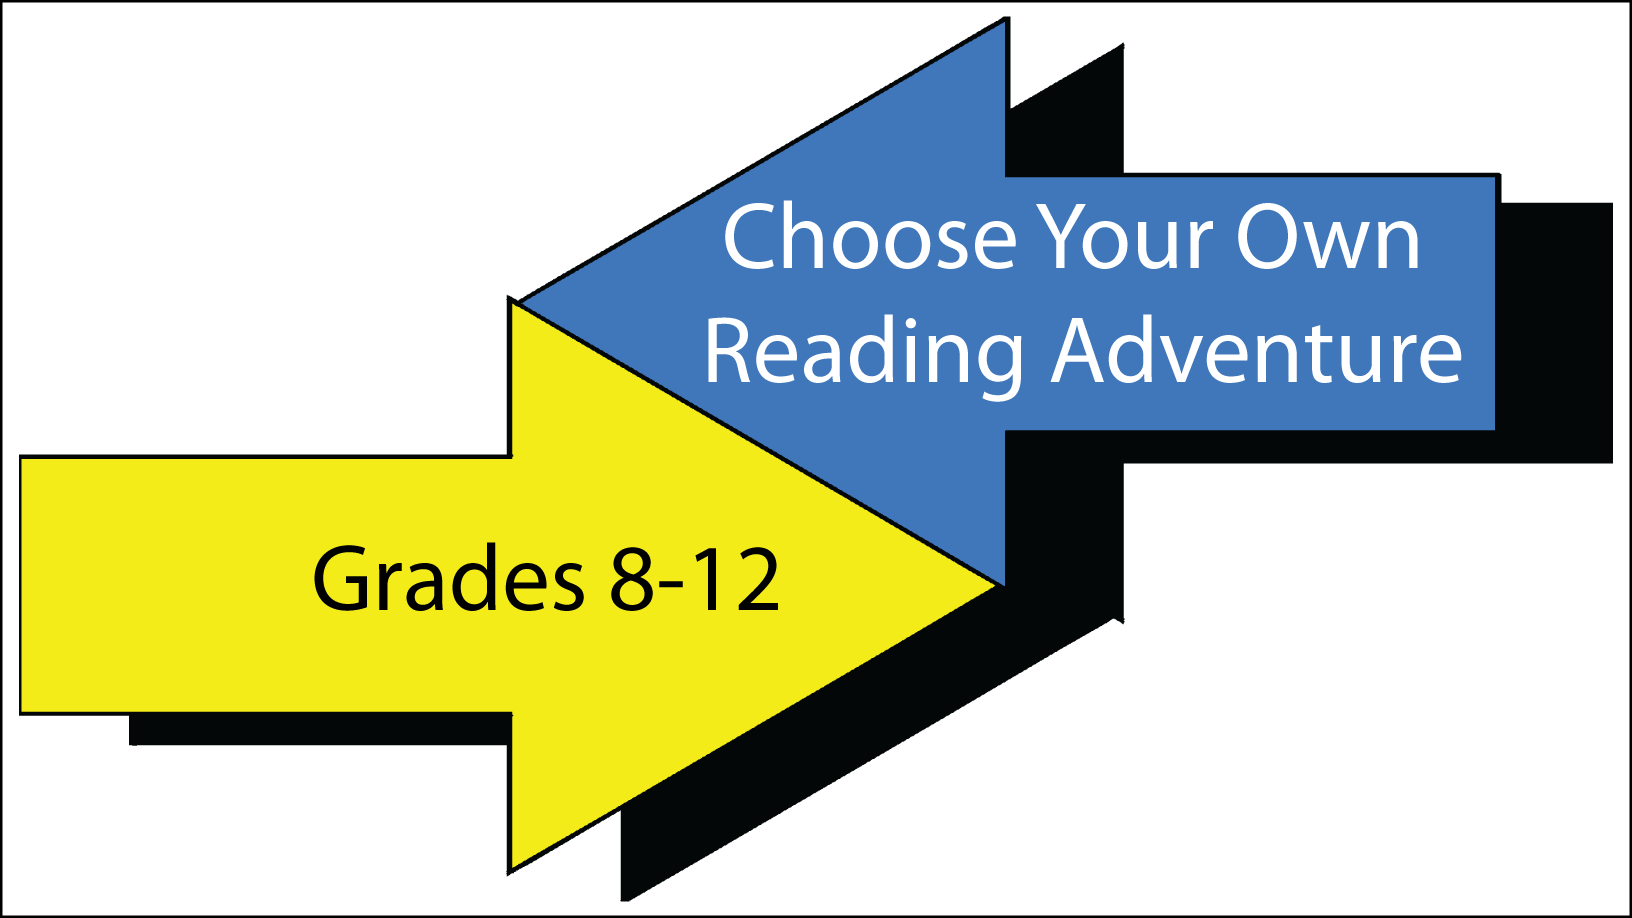 Choose Your Own Adventure for Grades 8-12